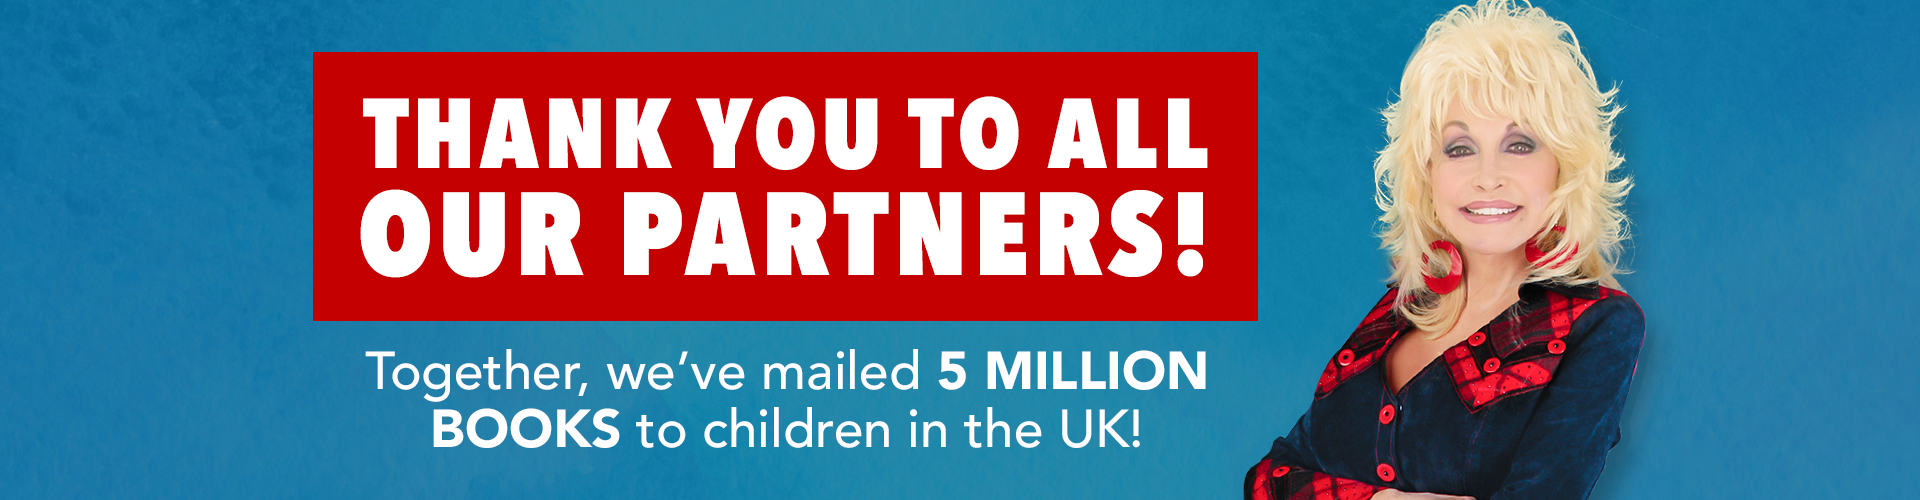 Thank you to all our partners, together we've reached 5 Million books in the UK!